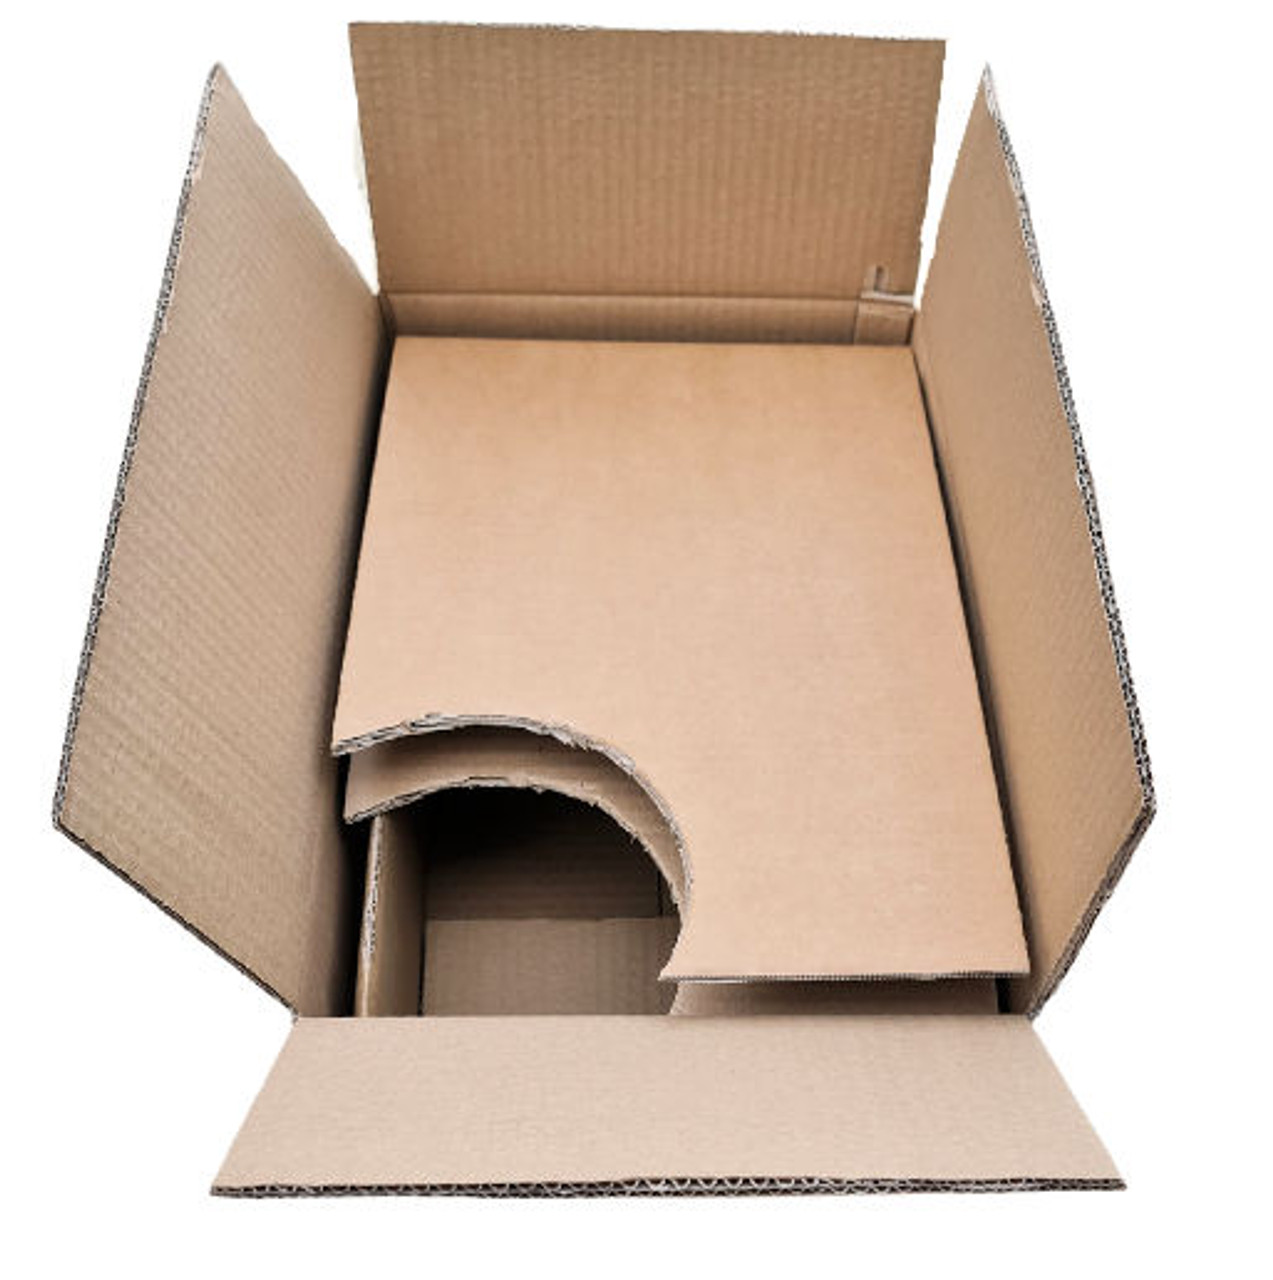 6klo Environmentally Friendly Insulated Cardboard Box ( pack x 60 )